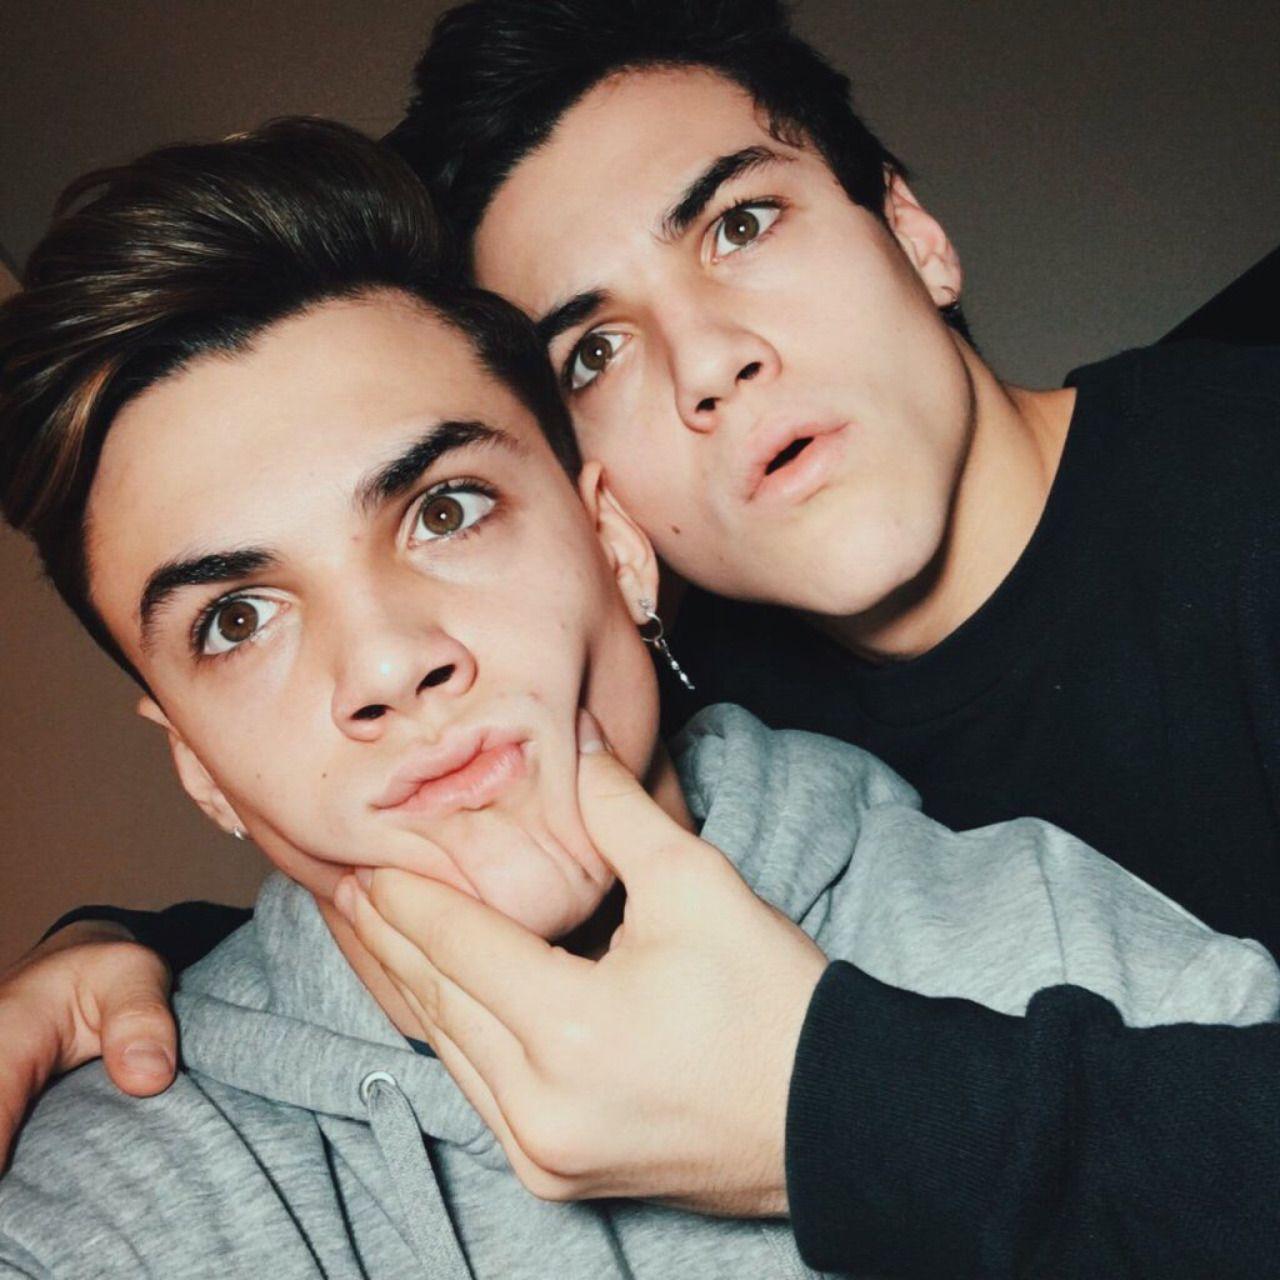 Ethan and Gray. The Dolan Twins